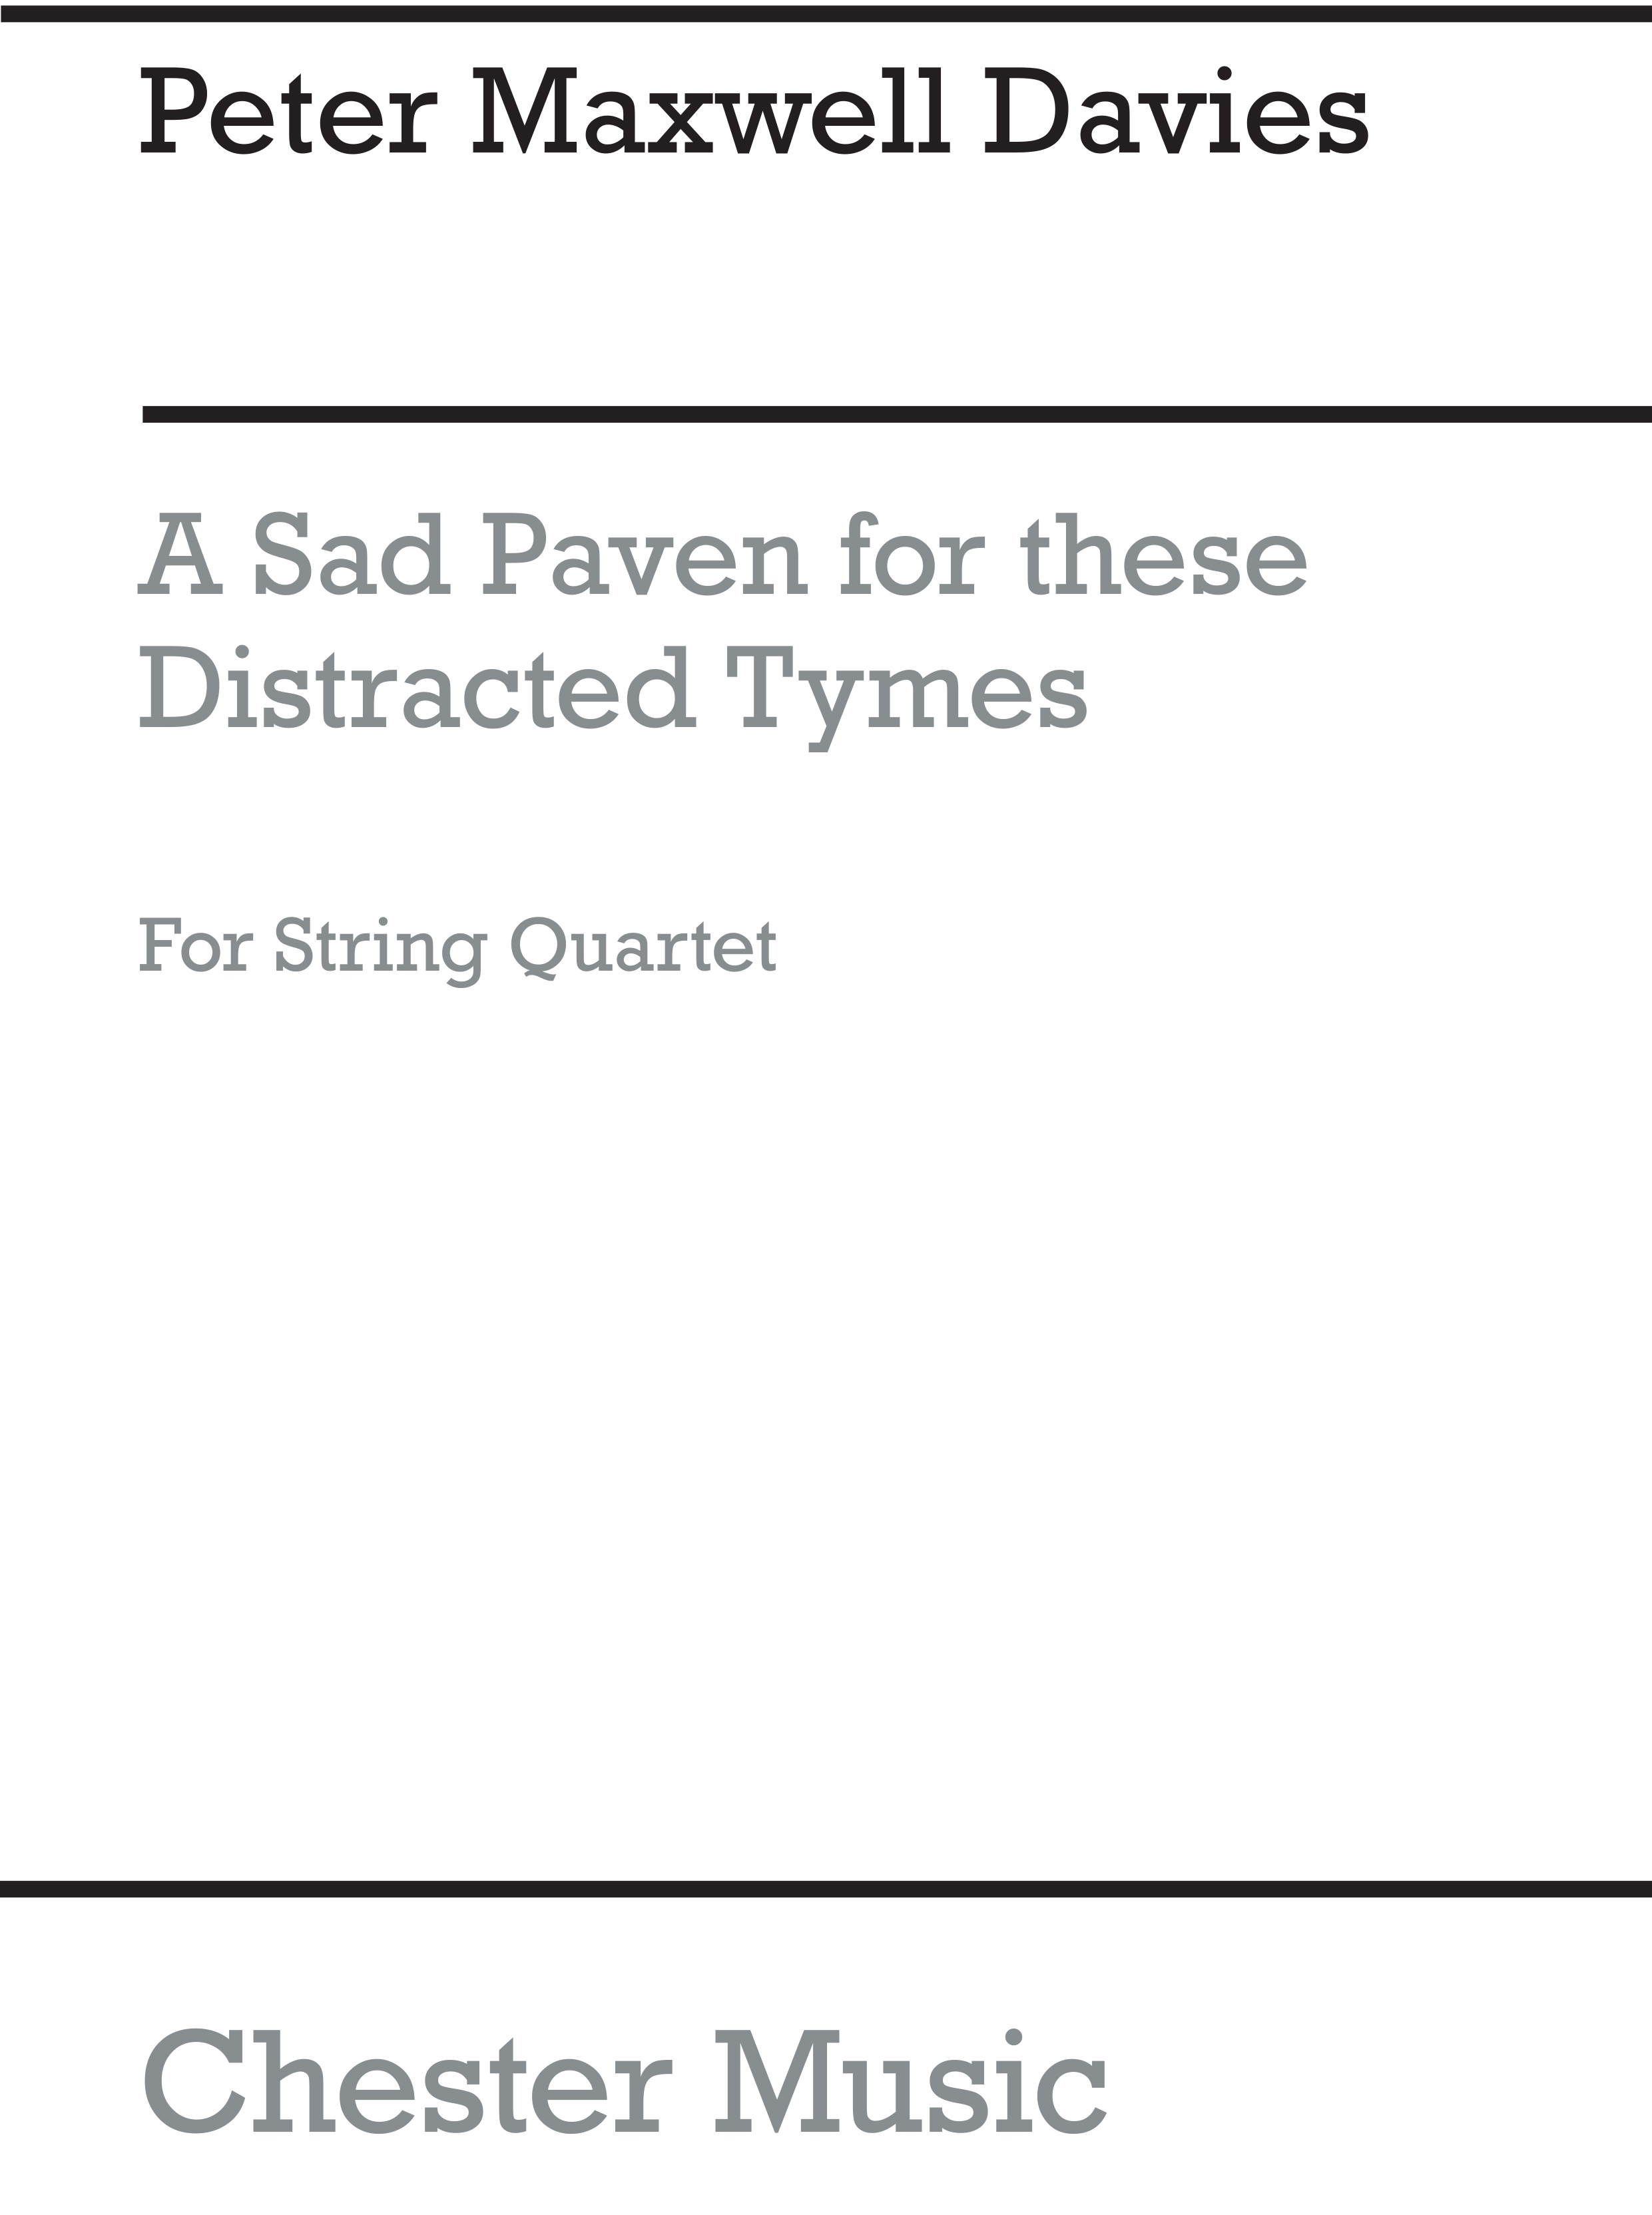 Peter Maxwell Davies: A Sad Paven For These Distracted Tymes (Parts): String